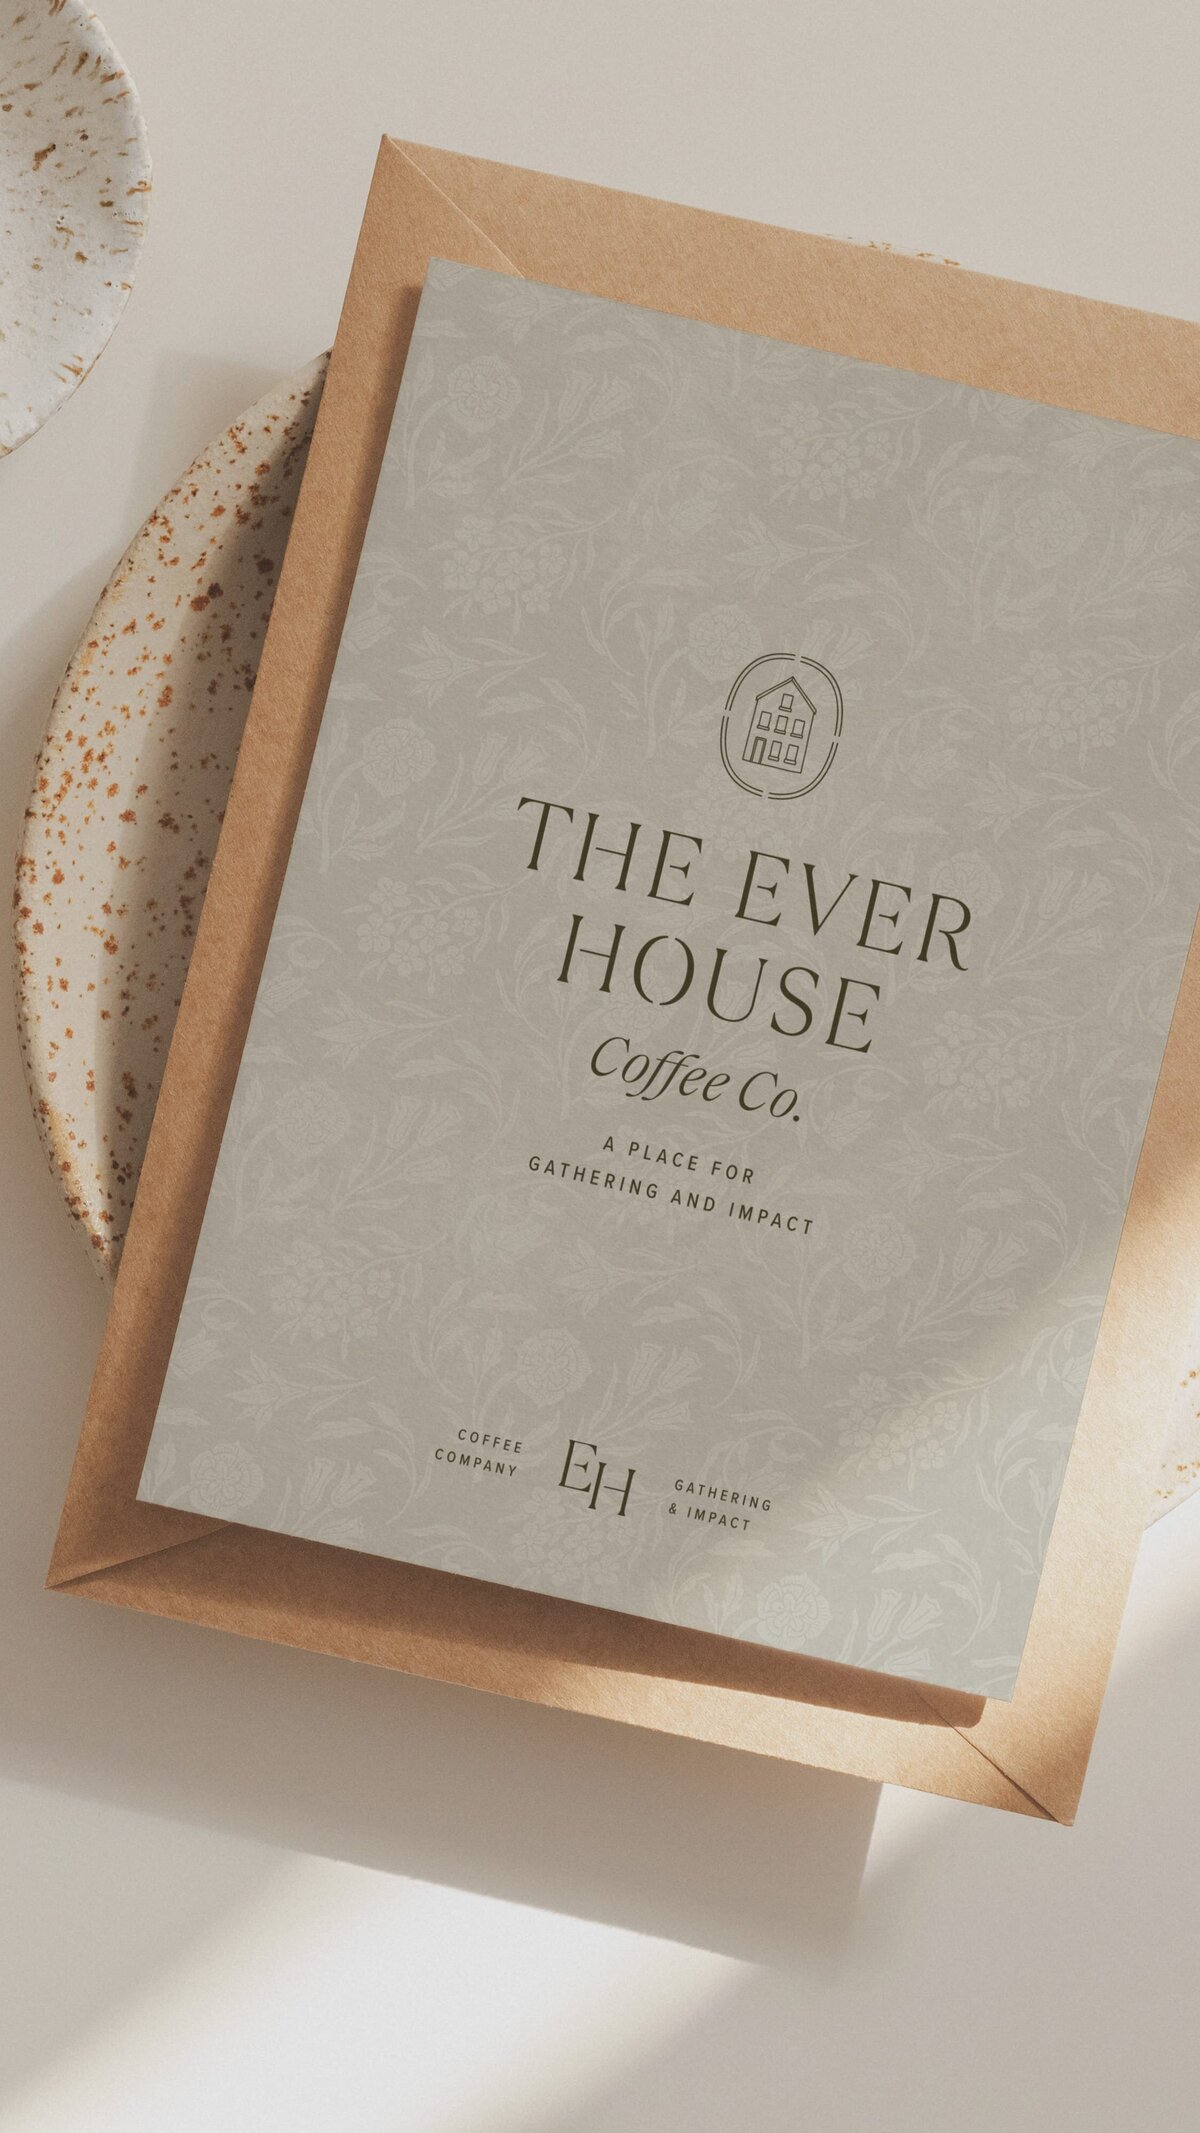 TheEverHouse_LaunchGraphics_Mobile4